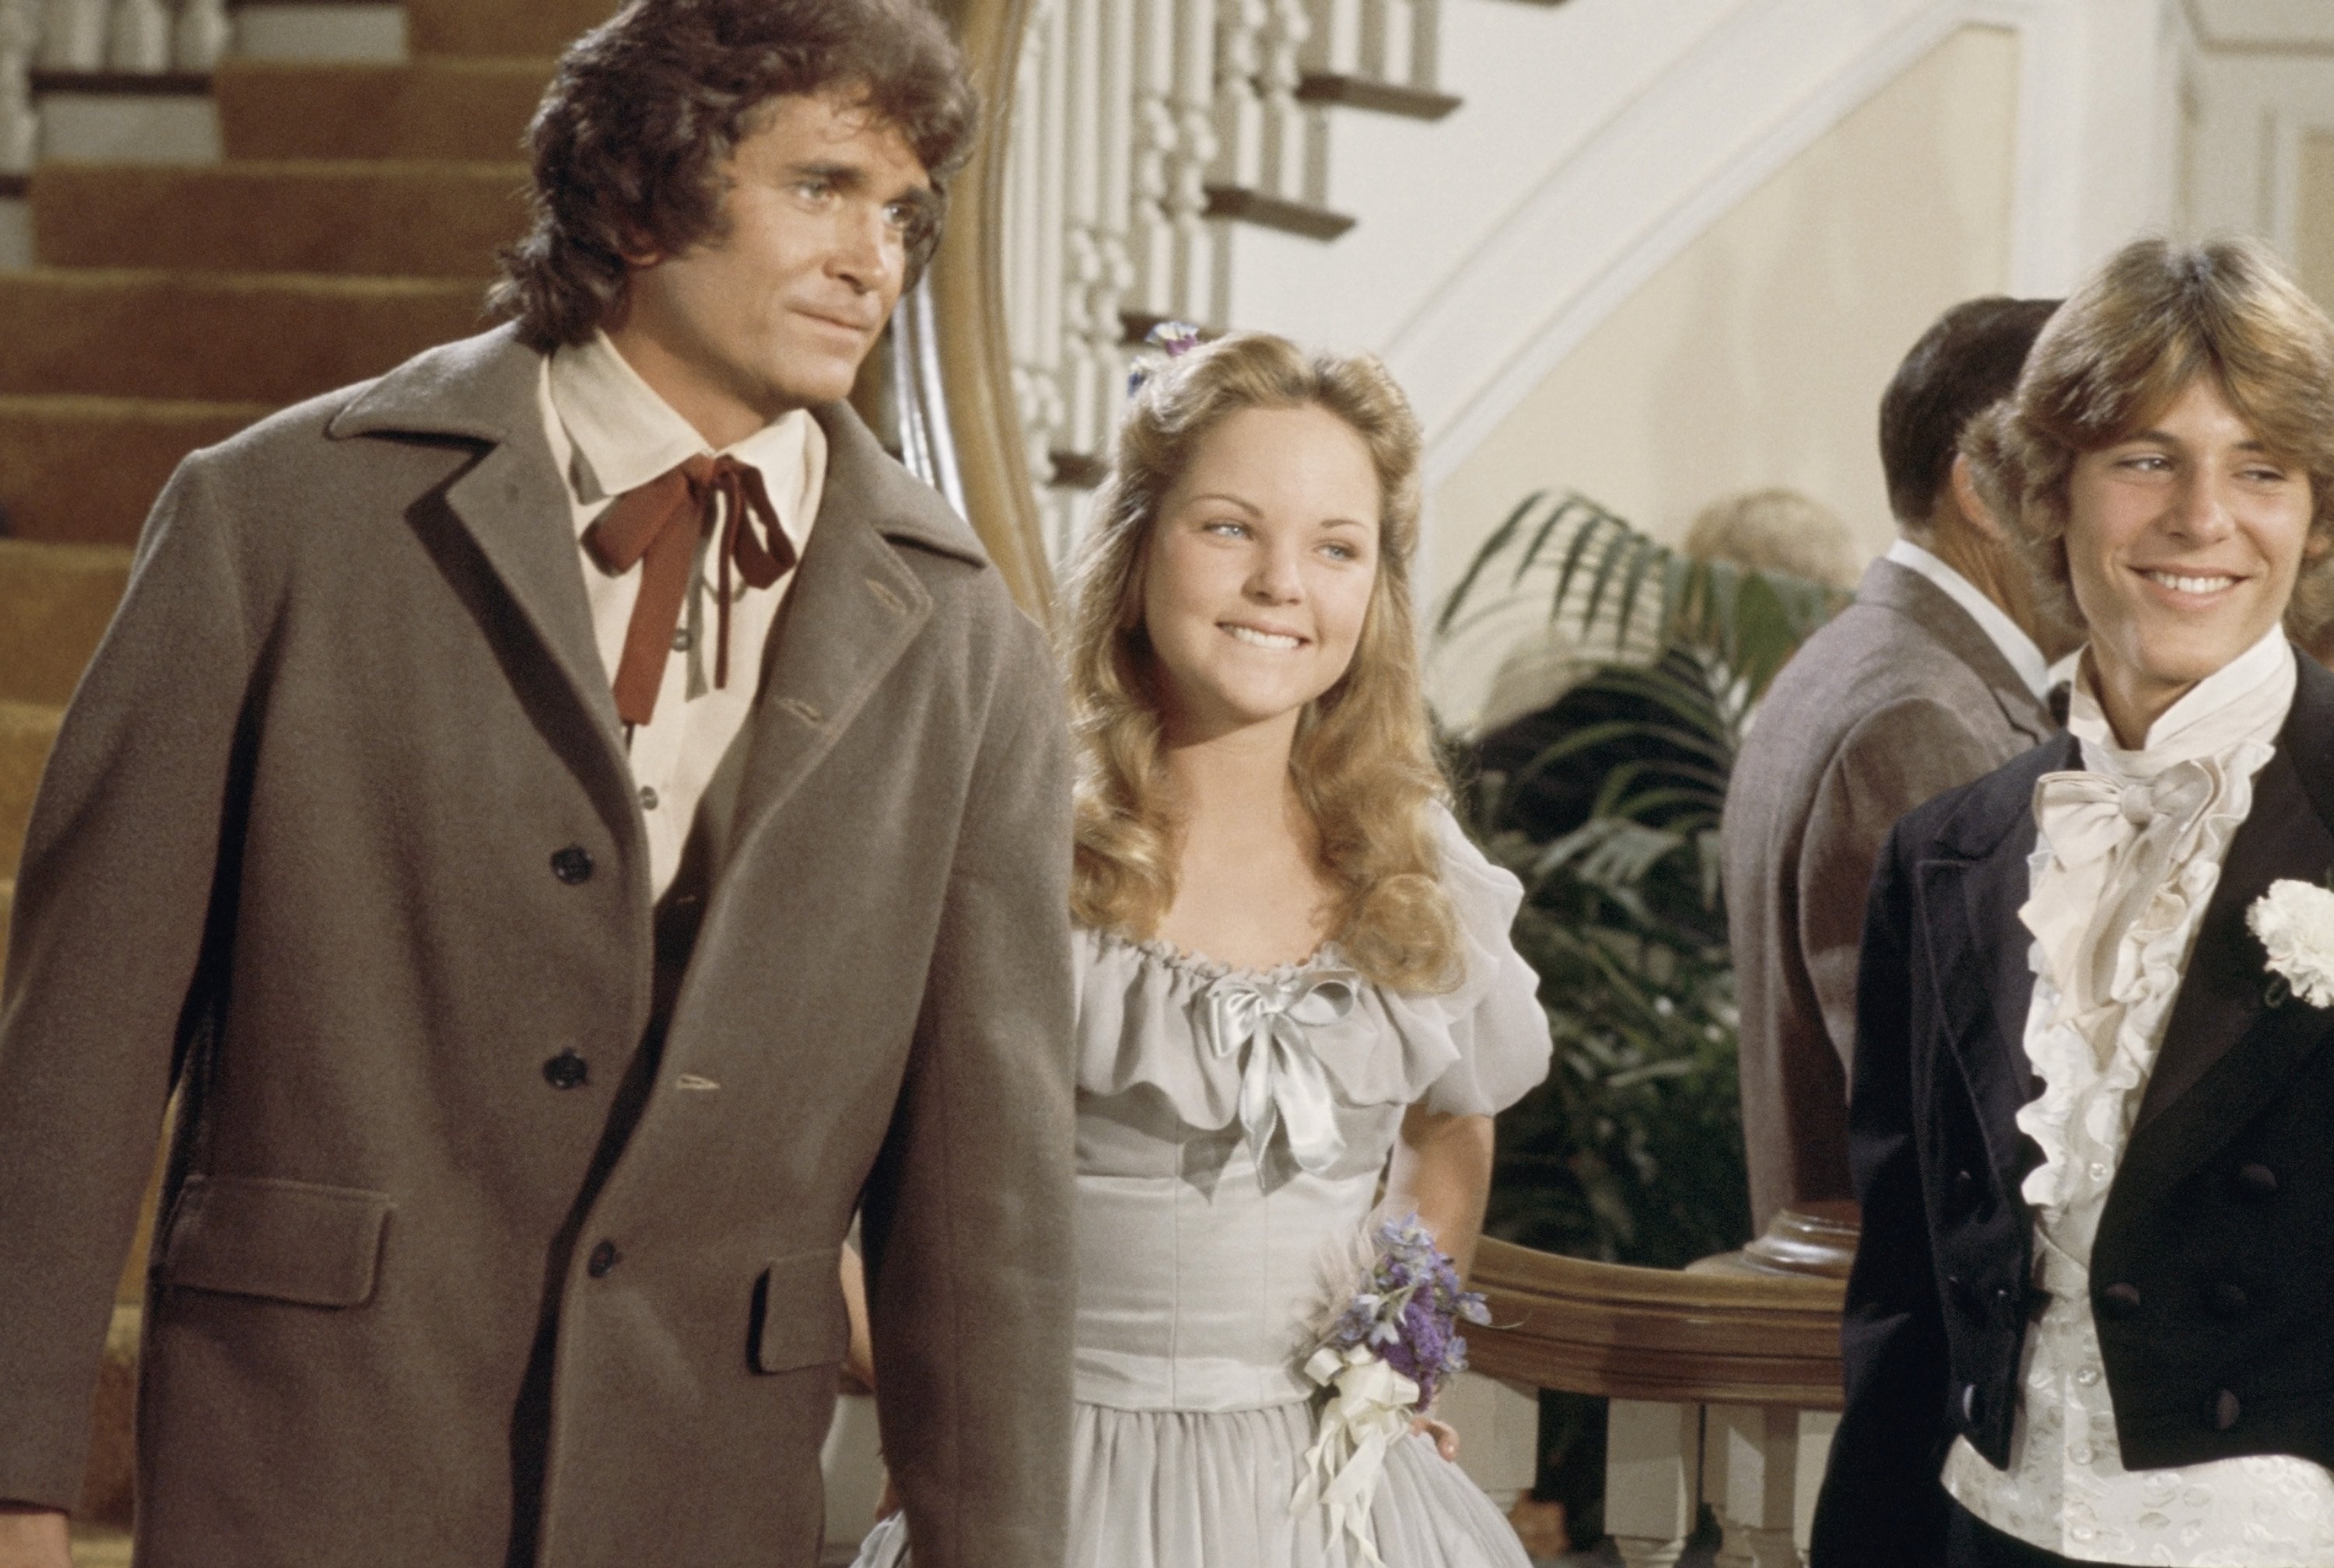 Michael Landon as Charles Philip Ingalls, Melissa Sue Anderson as Mary Ingalls, and an unknown individual on "Little House on the Prairie," aired on November 1976. / Source: Getty Images